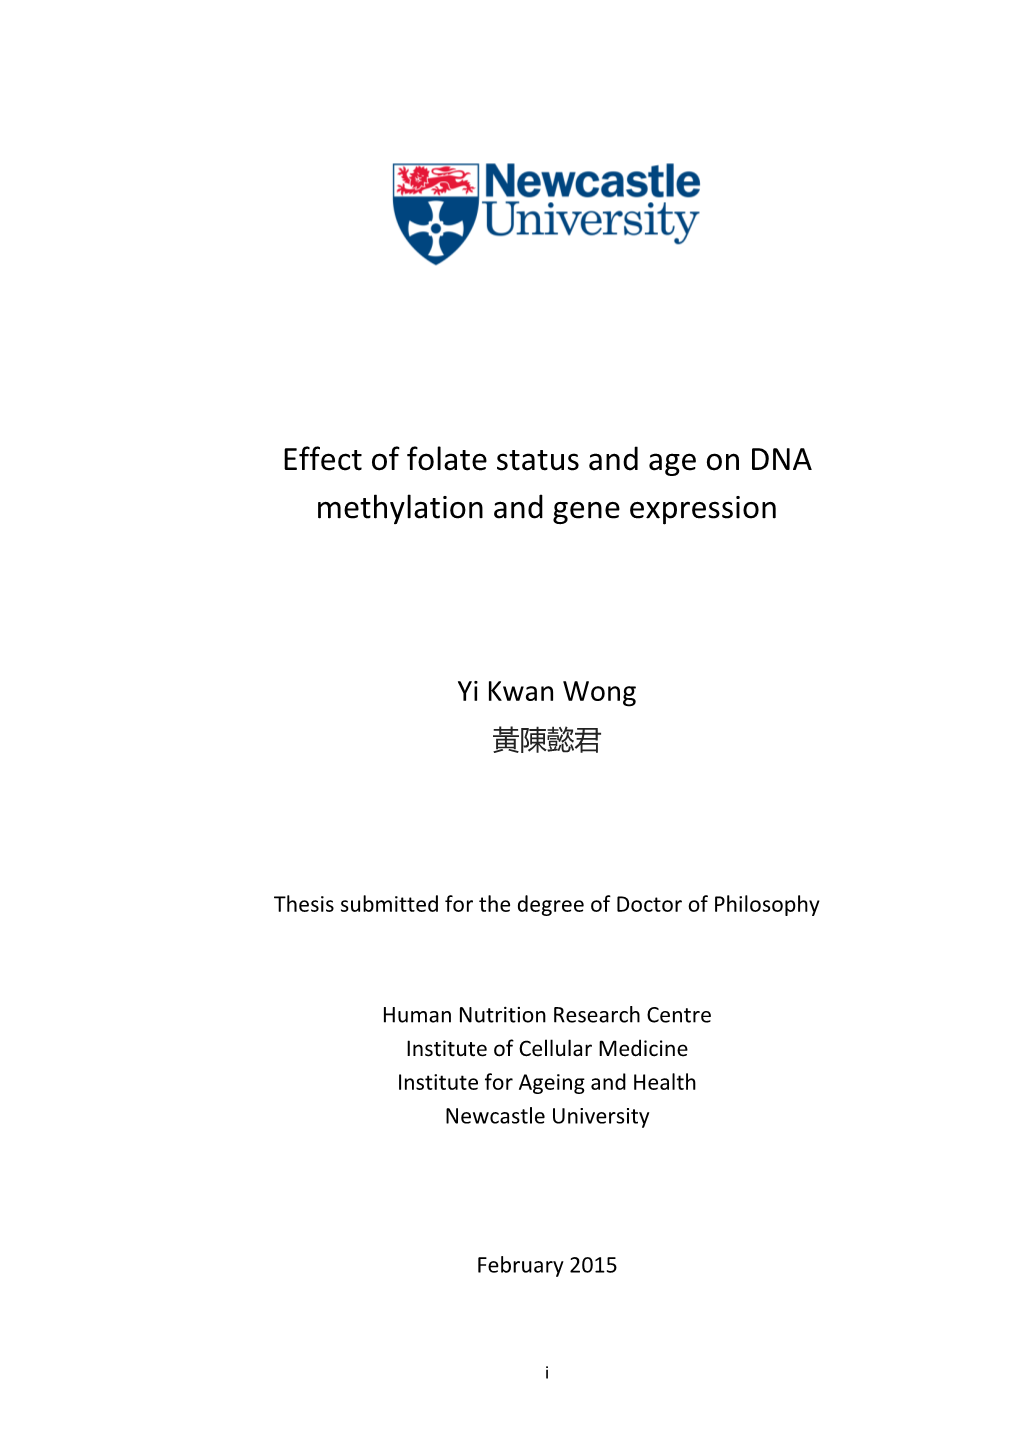 Effect of Folate Status and Age on DNA Methylation and Gene Expression